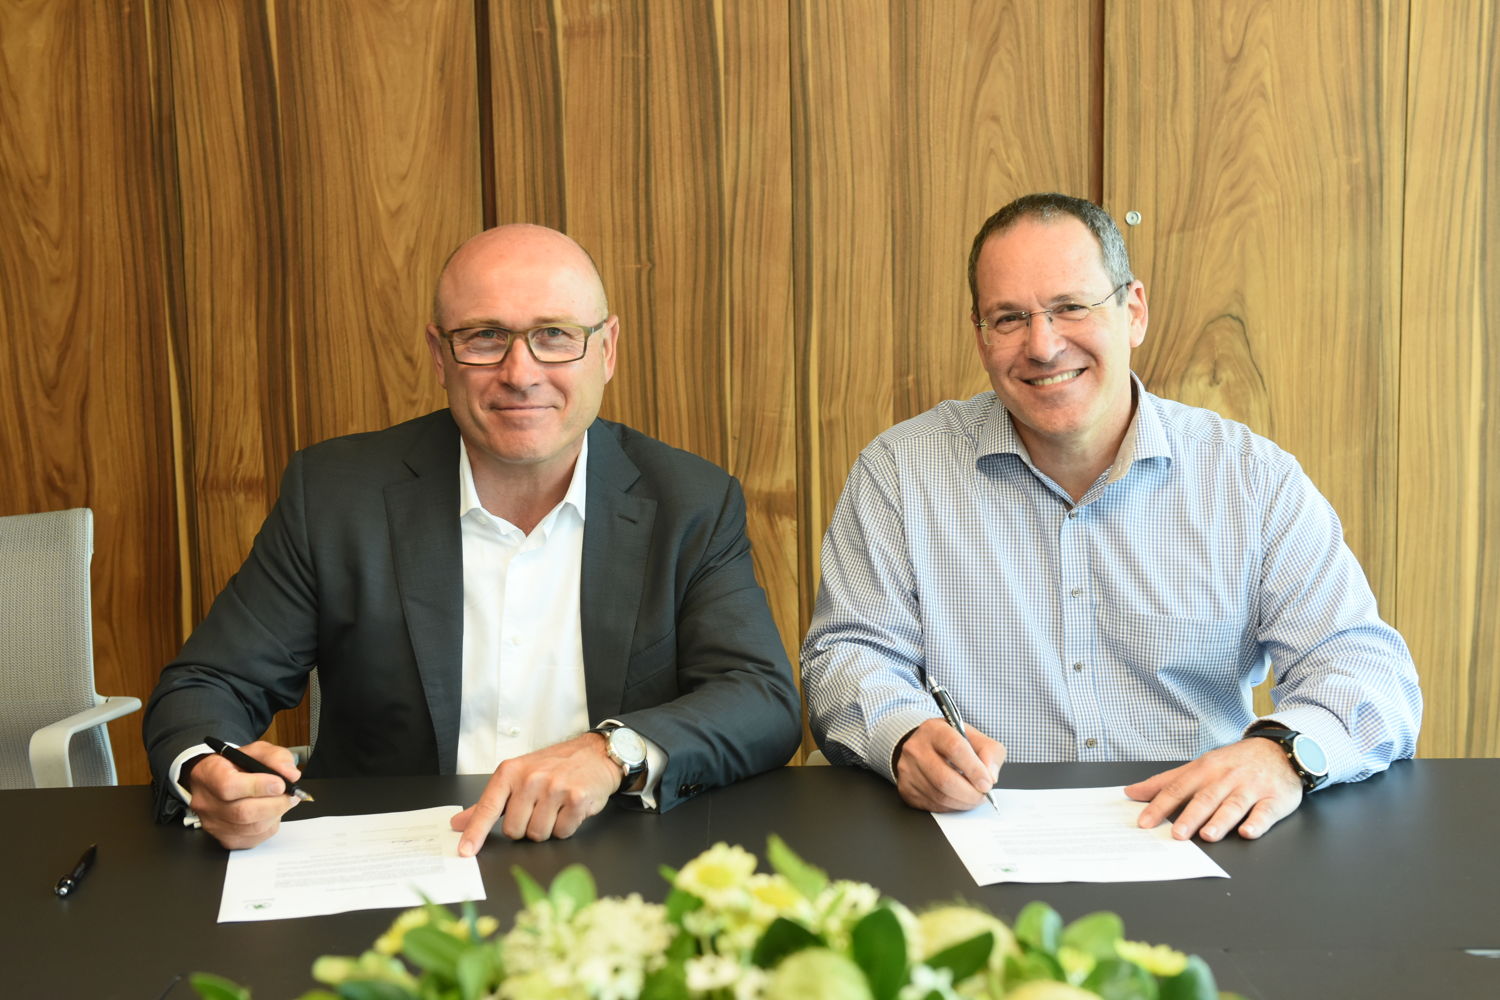 ŠKODA AUTO CEO Bernhard Maier (on the left) and Anagog CEO Ofer Tziperman signing the agreement in Tel Aviv. The strategic investment in Anagog is ŠKODA's next logical step in the Israeli start-up scene.